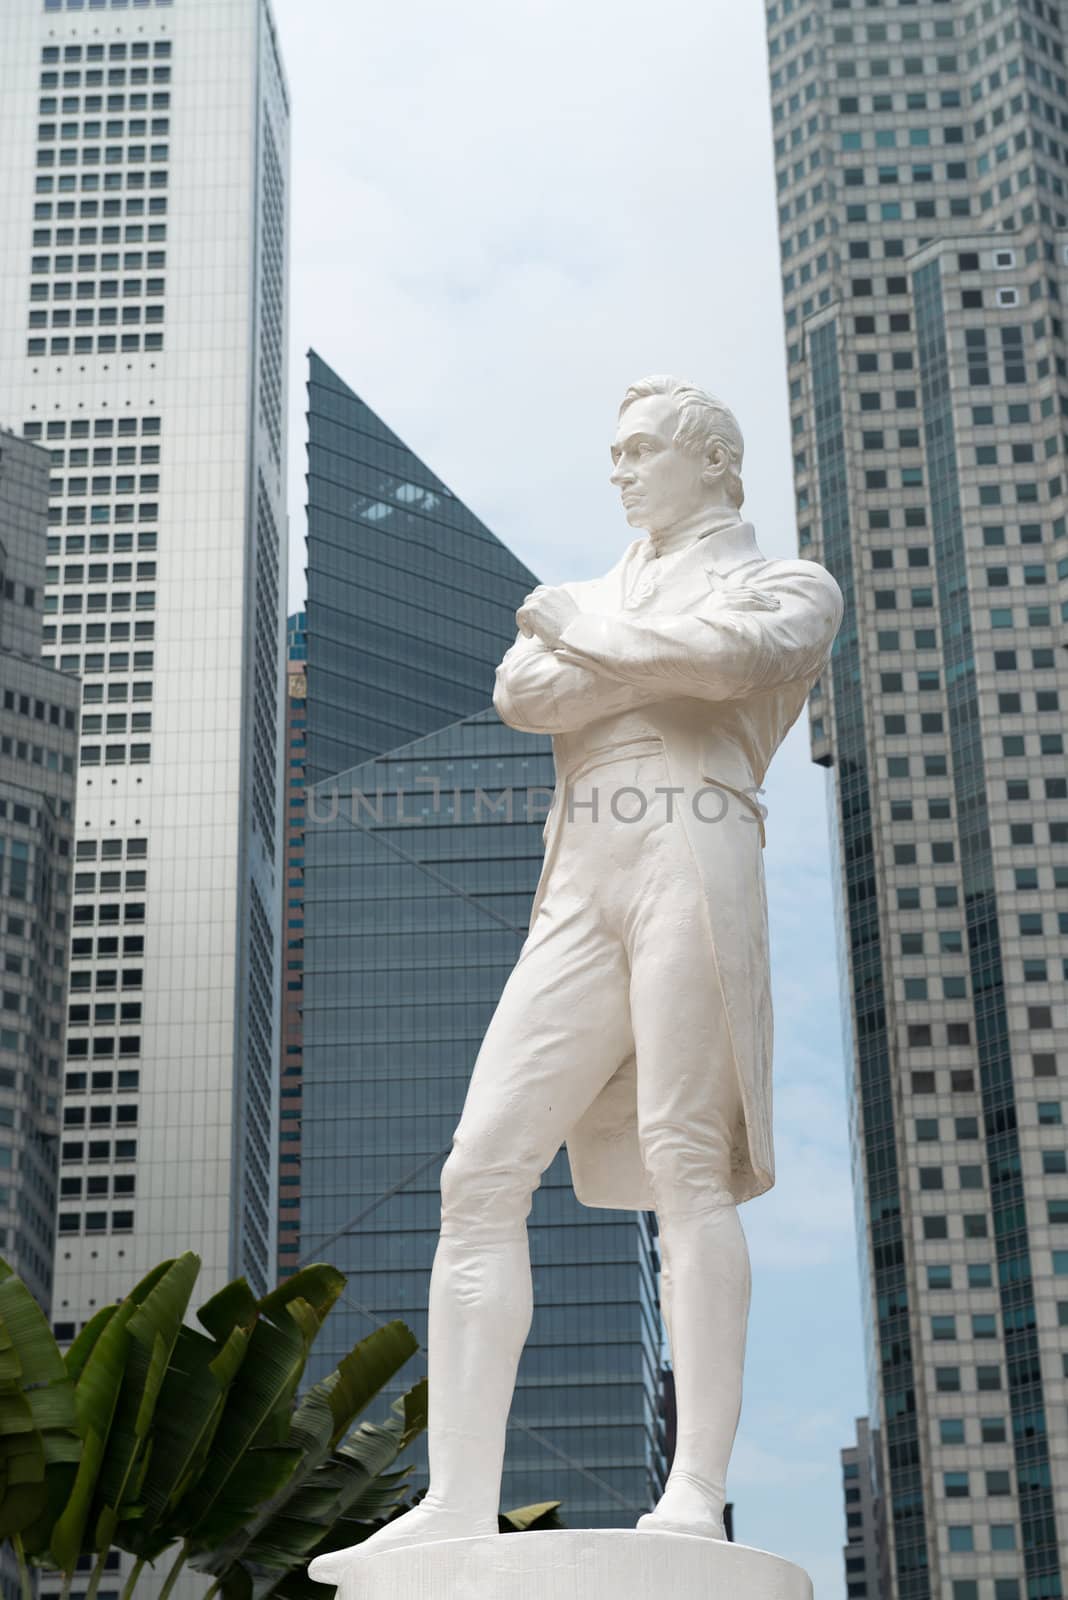 Sir Raffles statue with modern skyscrapers on background, Singapore